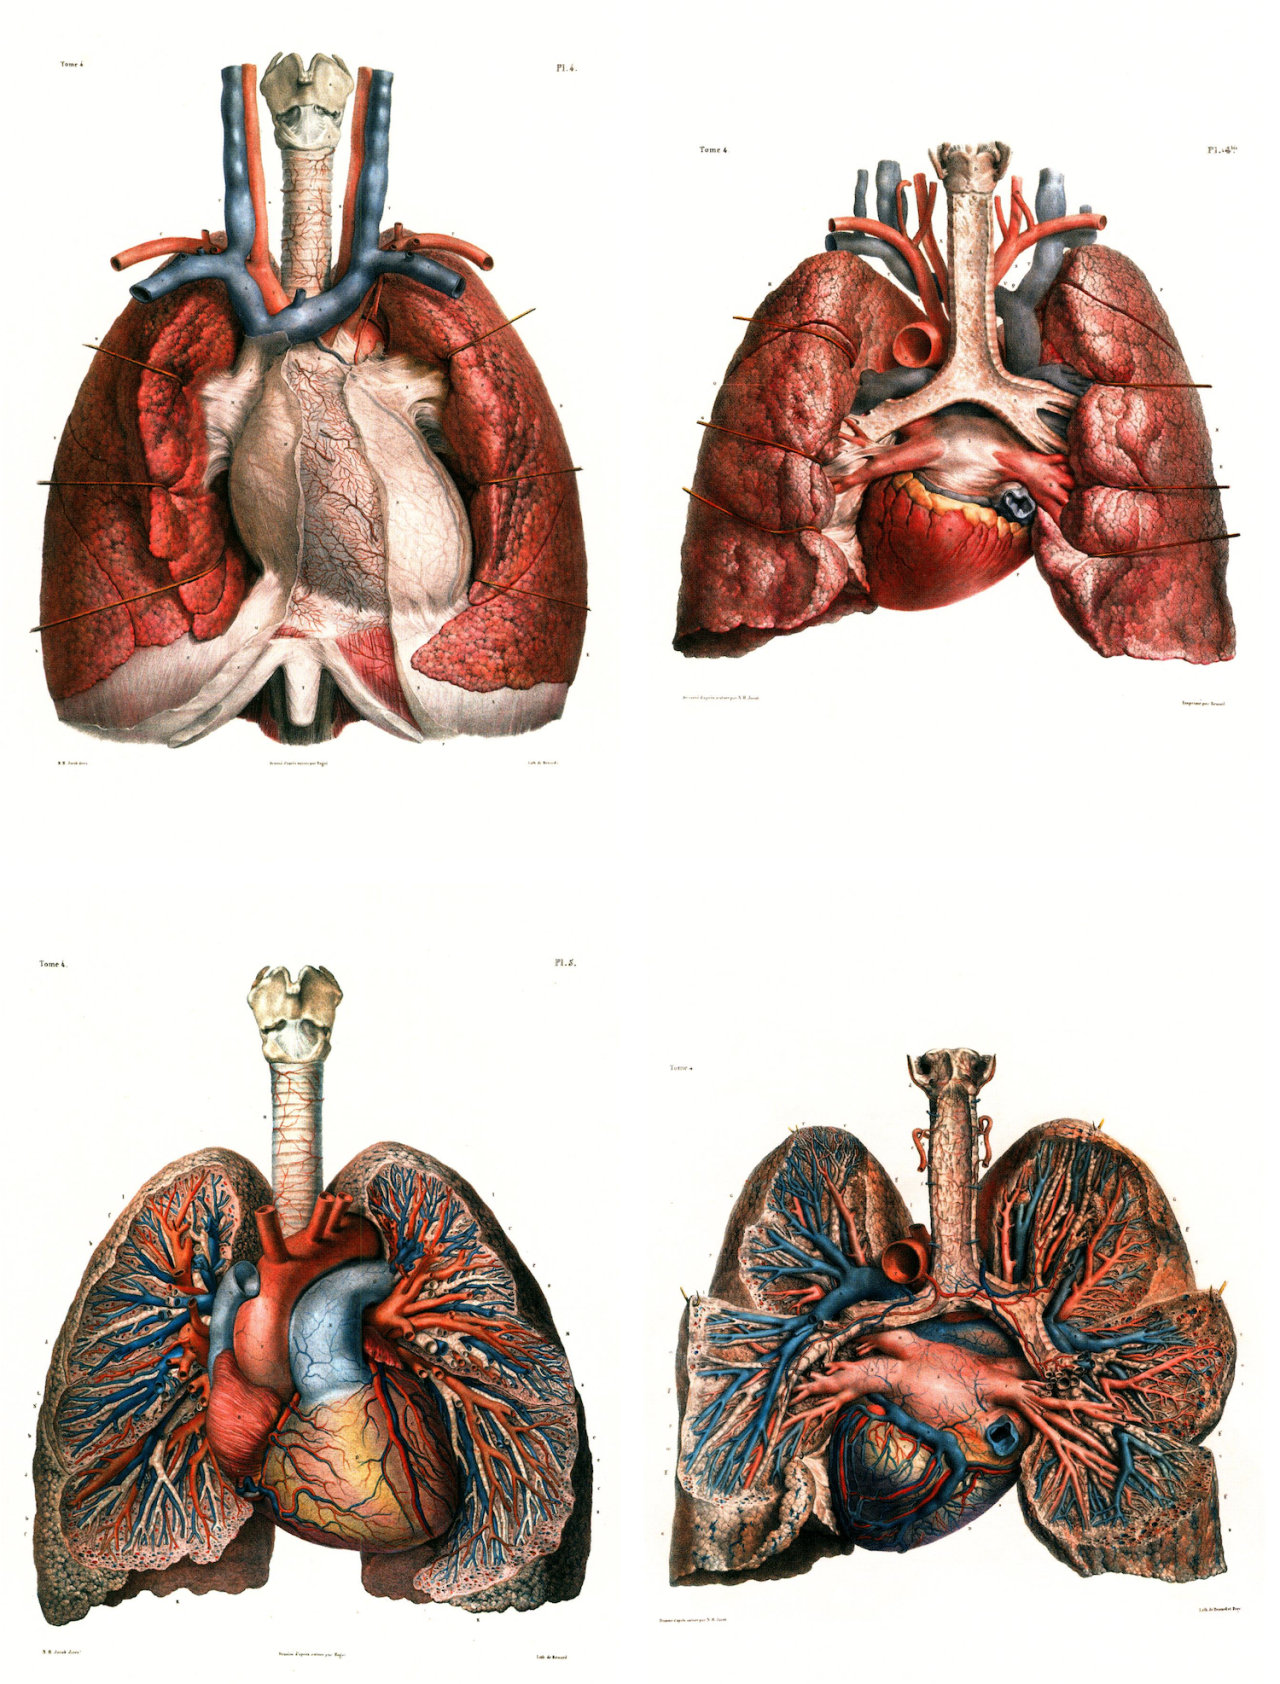 brettkingery:   Selections from the “Atlas of Human Anatomy and Surgery” by Jean-Marie